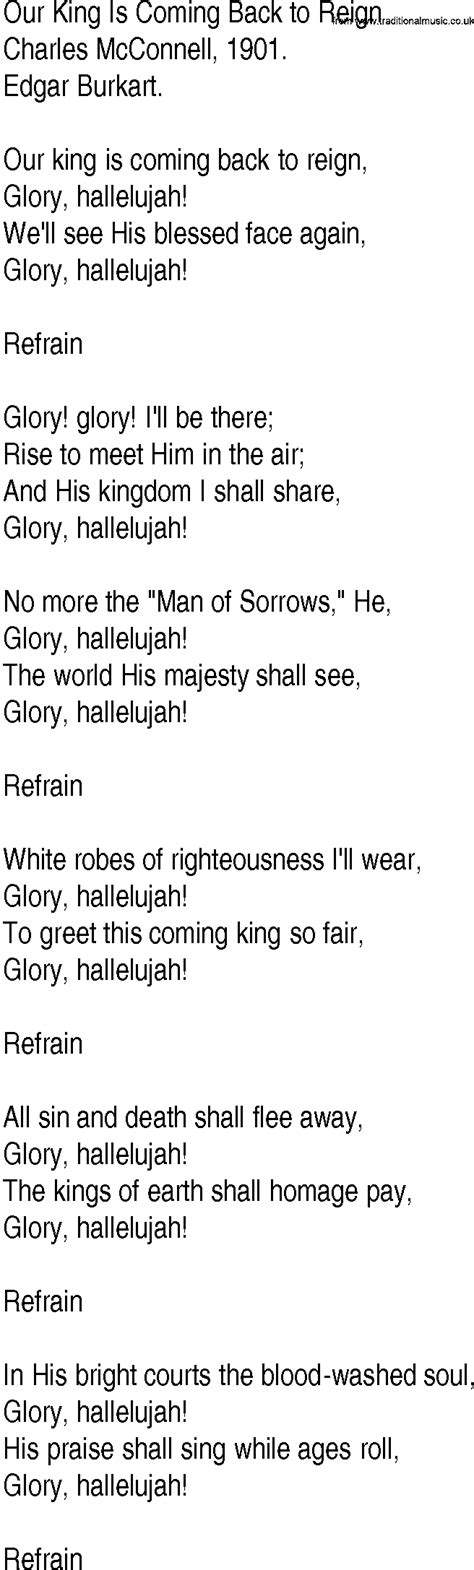 Hymn And Gospel Song Lyrics For Our King Is Coming Back To Reign By